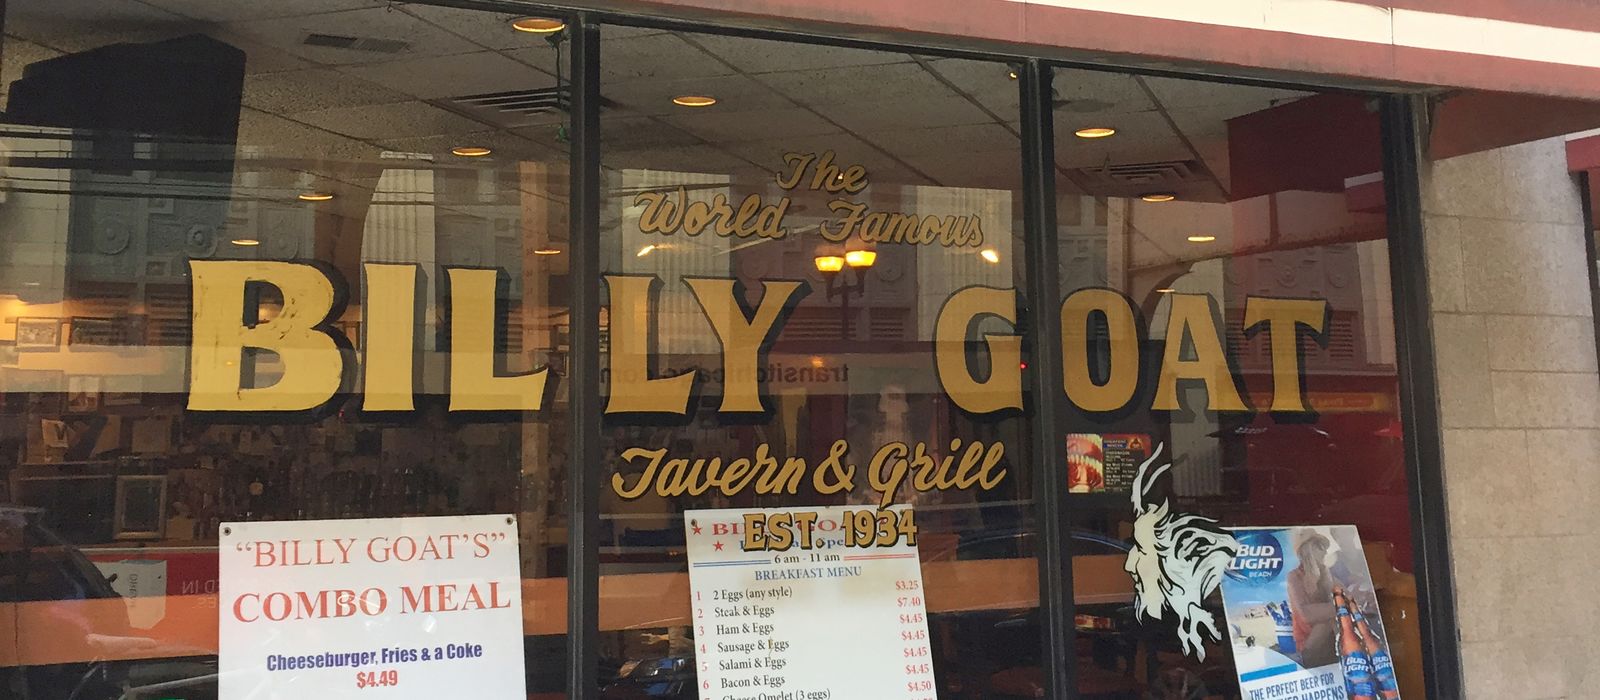 The World Famous Billy Goat, Chicago, Illinois